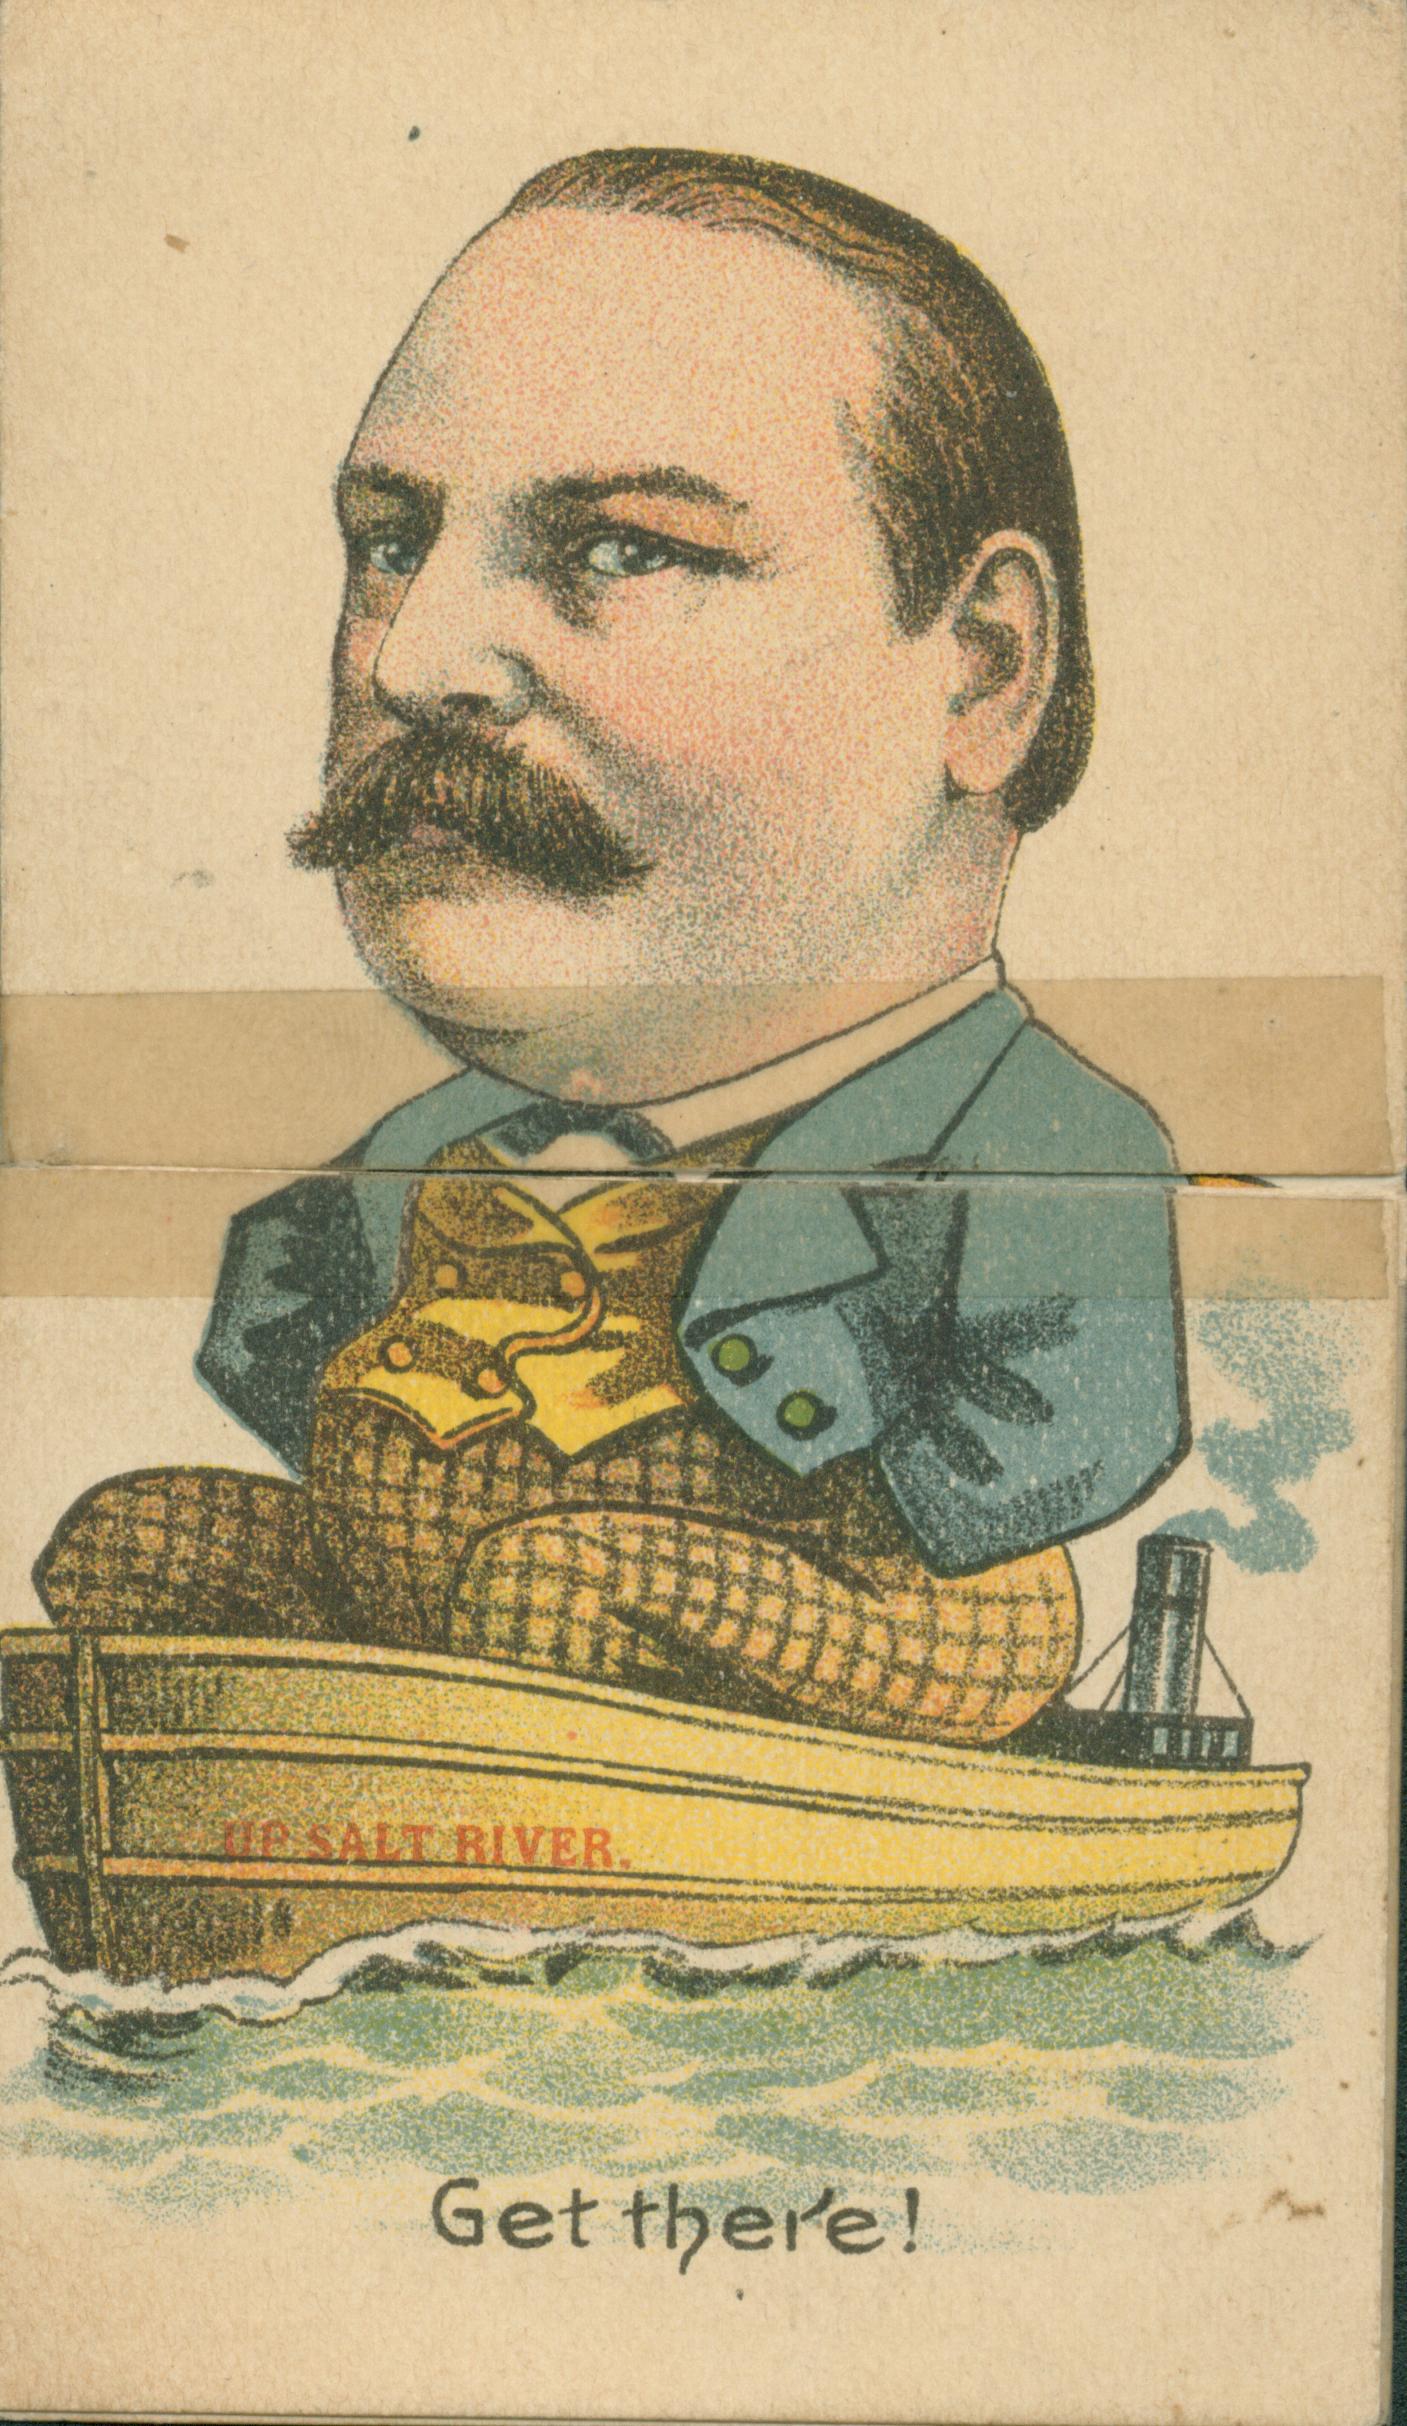 From the back: 'This 'Campaign Joker' is so cut that either candidate can be put in the presidential chair or sent up 'Salt River, etc.' The front page is a portrait of Grover Cleveland